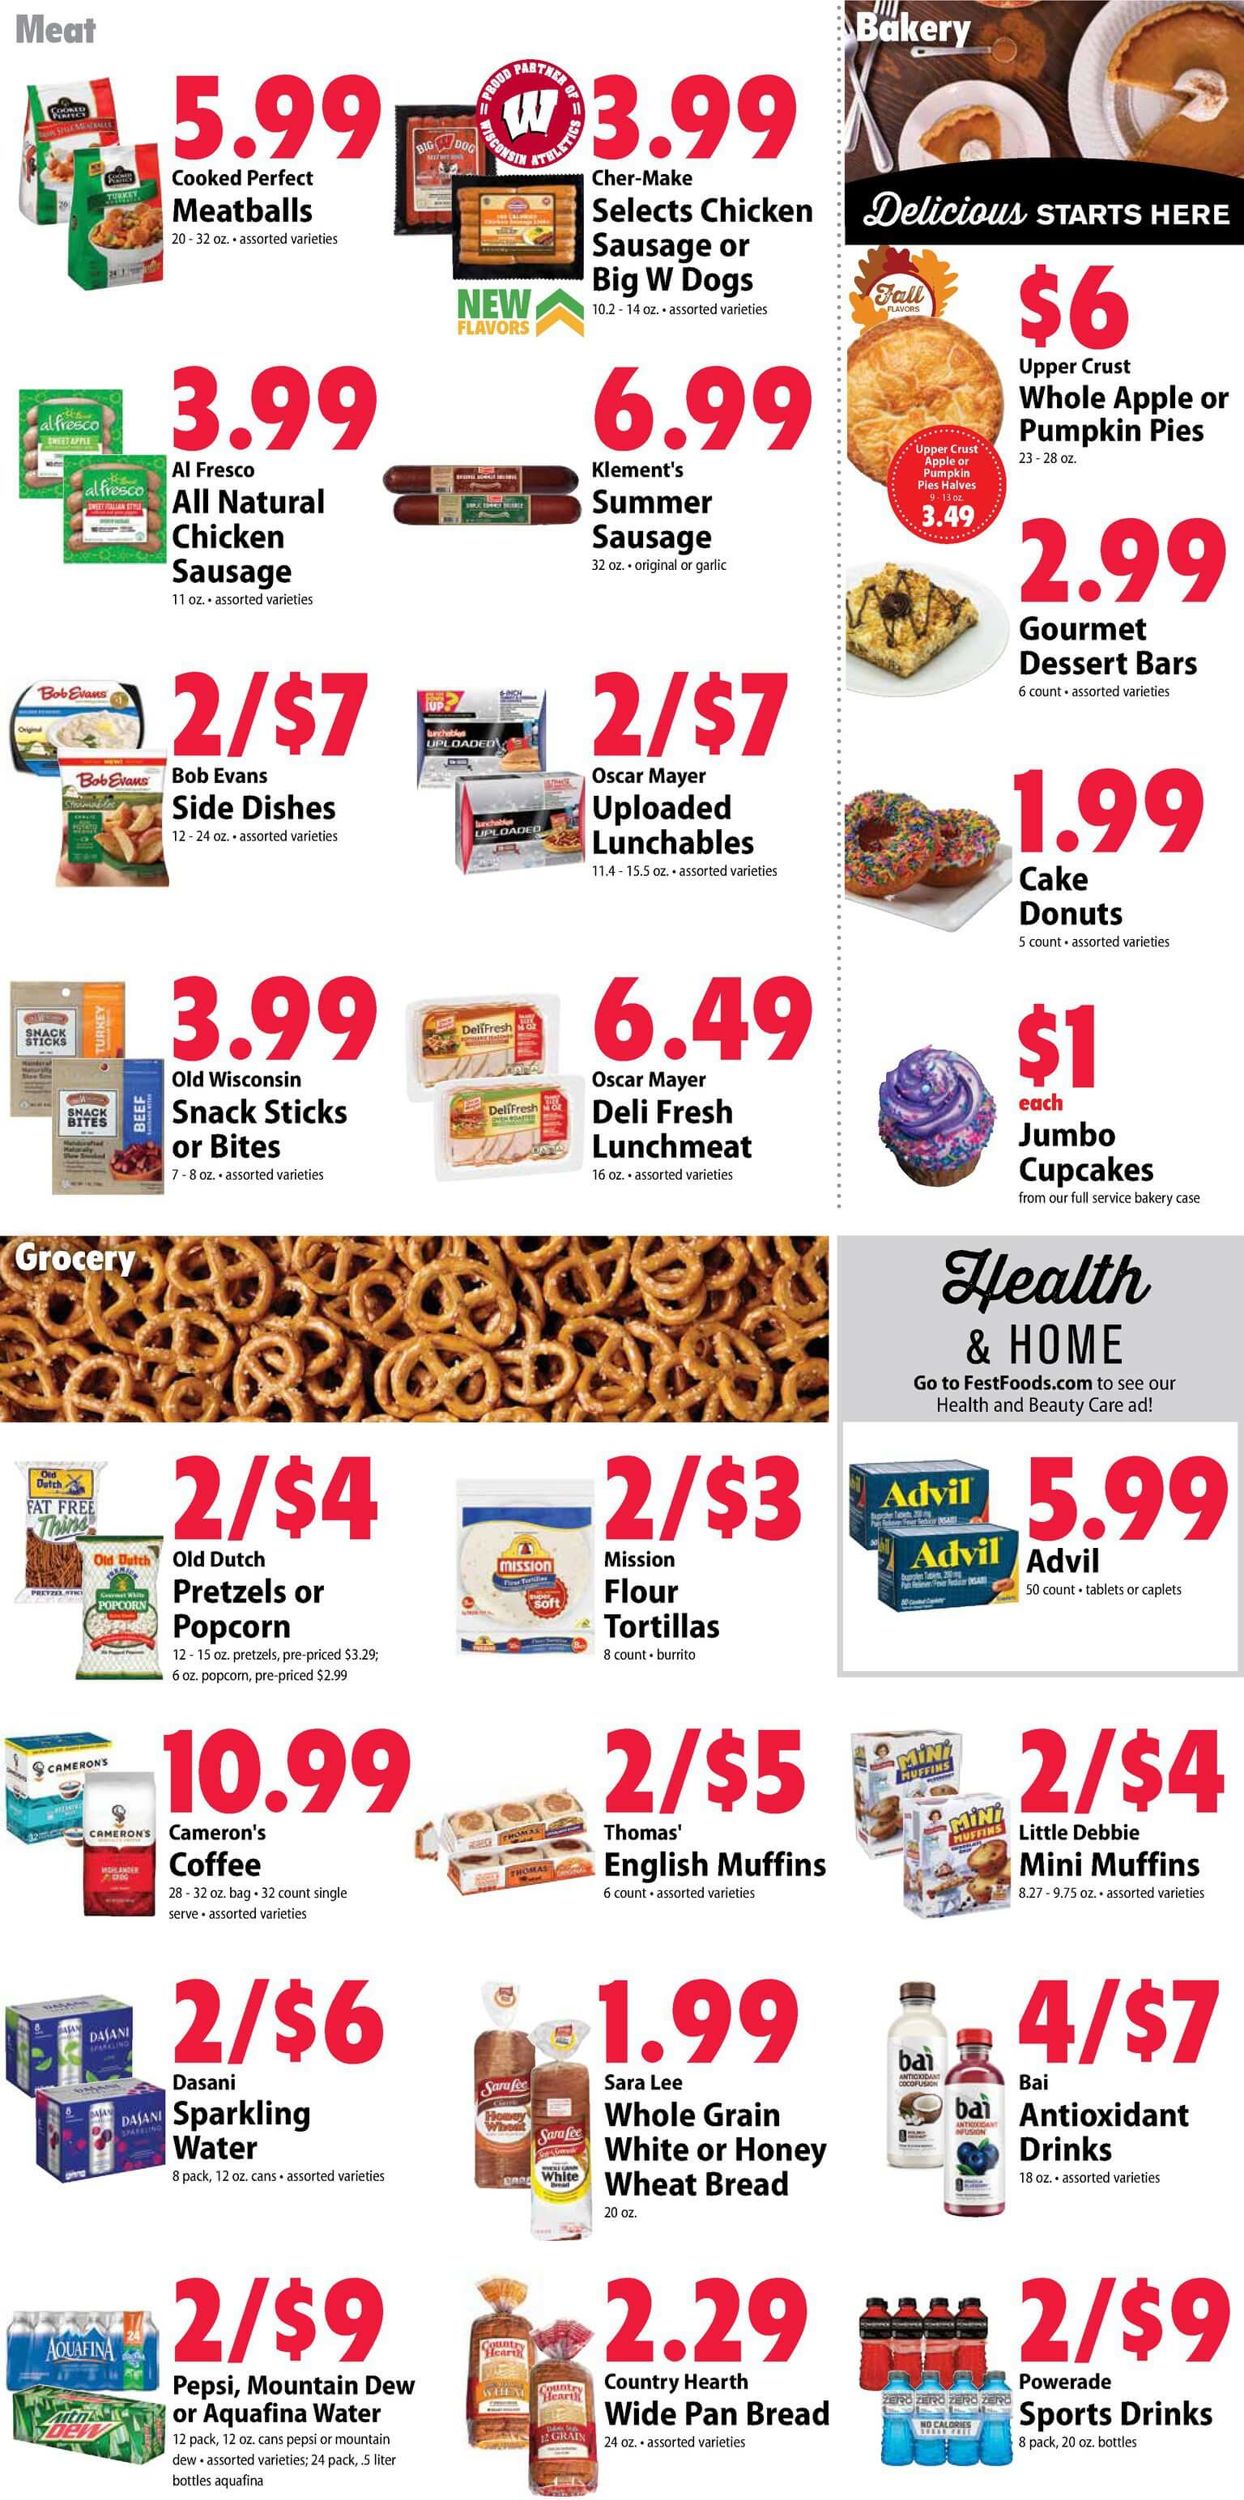 Festival Foods Current weekly ad 10/09 10/15/2019 [4]